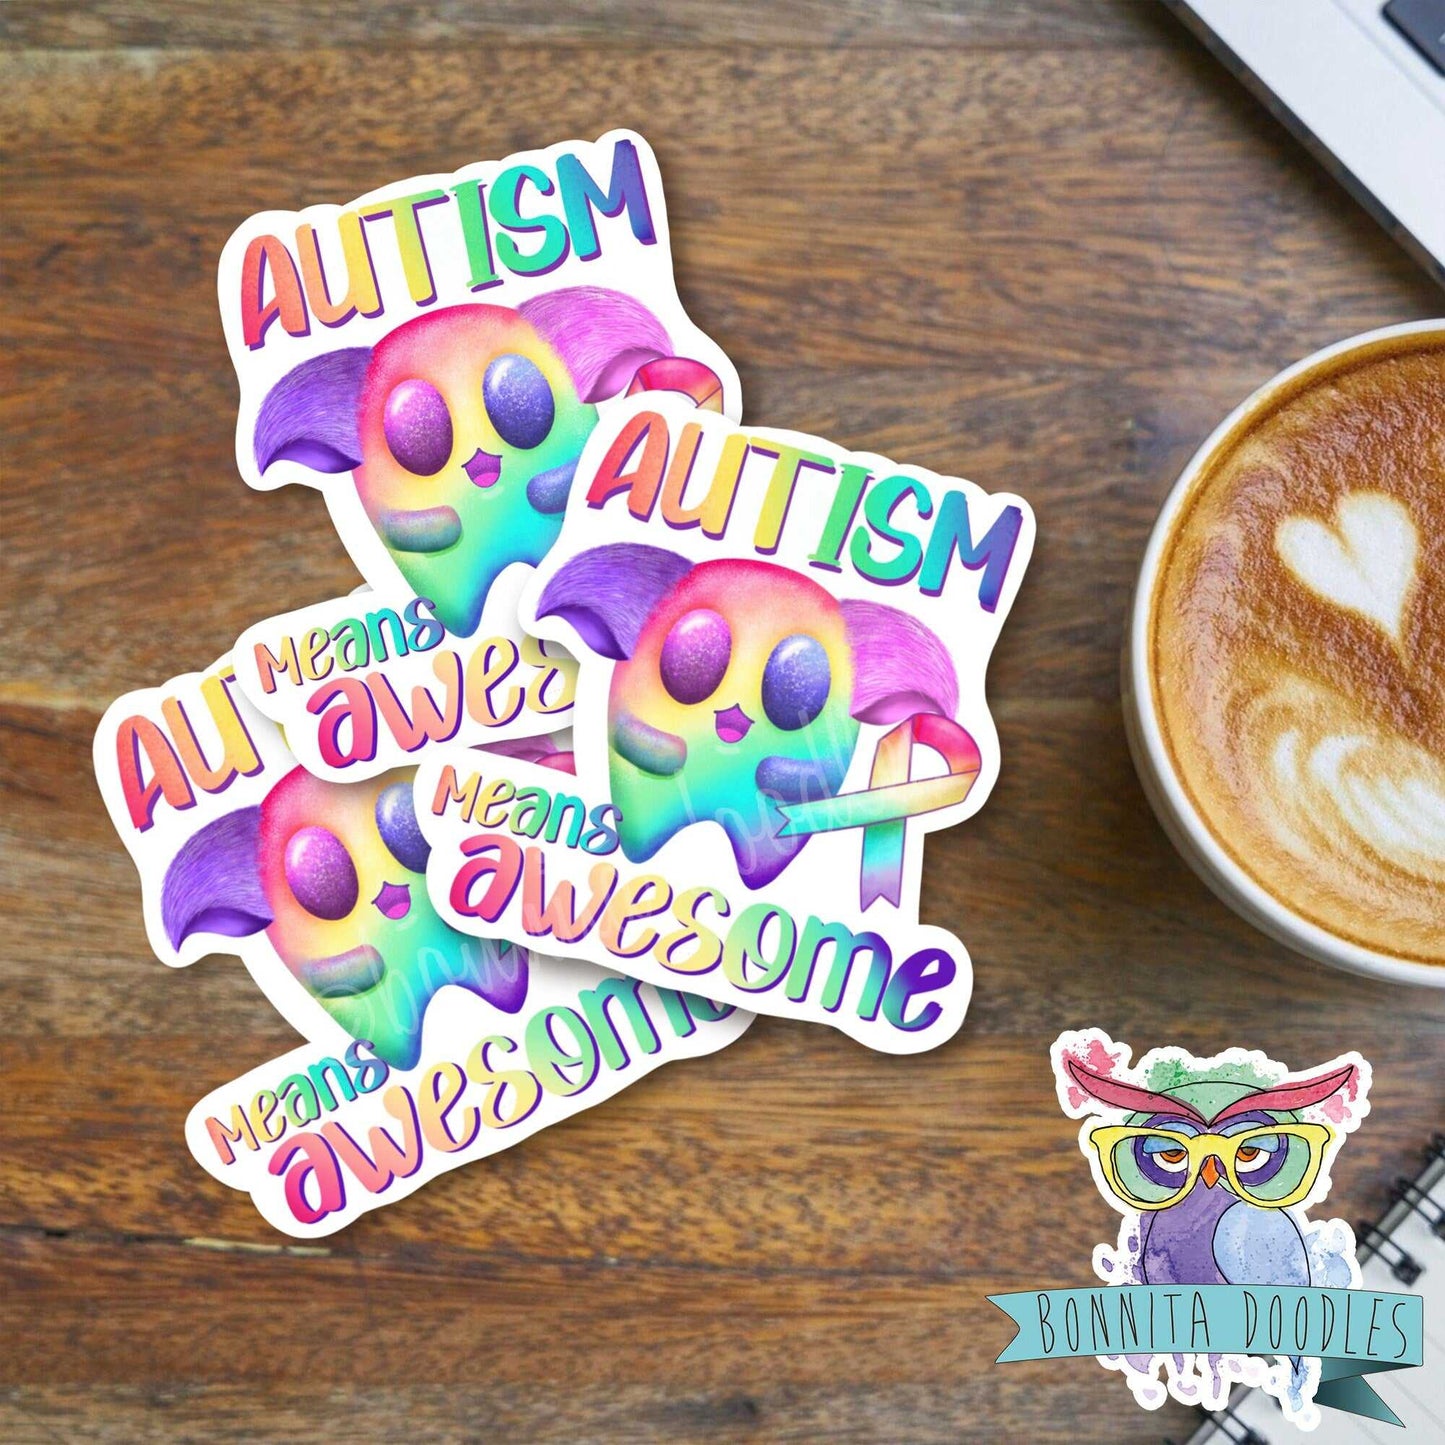 Autism is Awesome - Rainbow fleeting Sticker